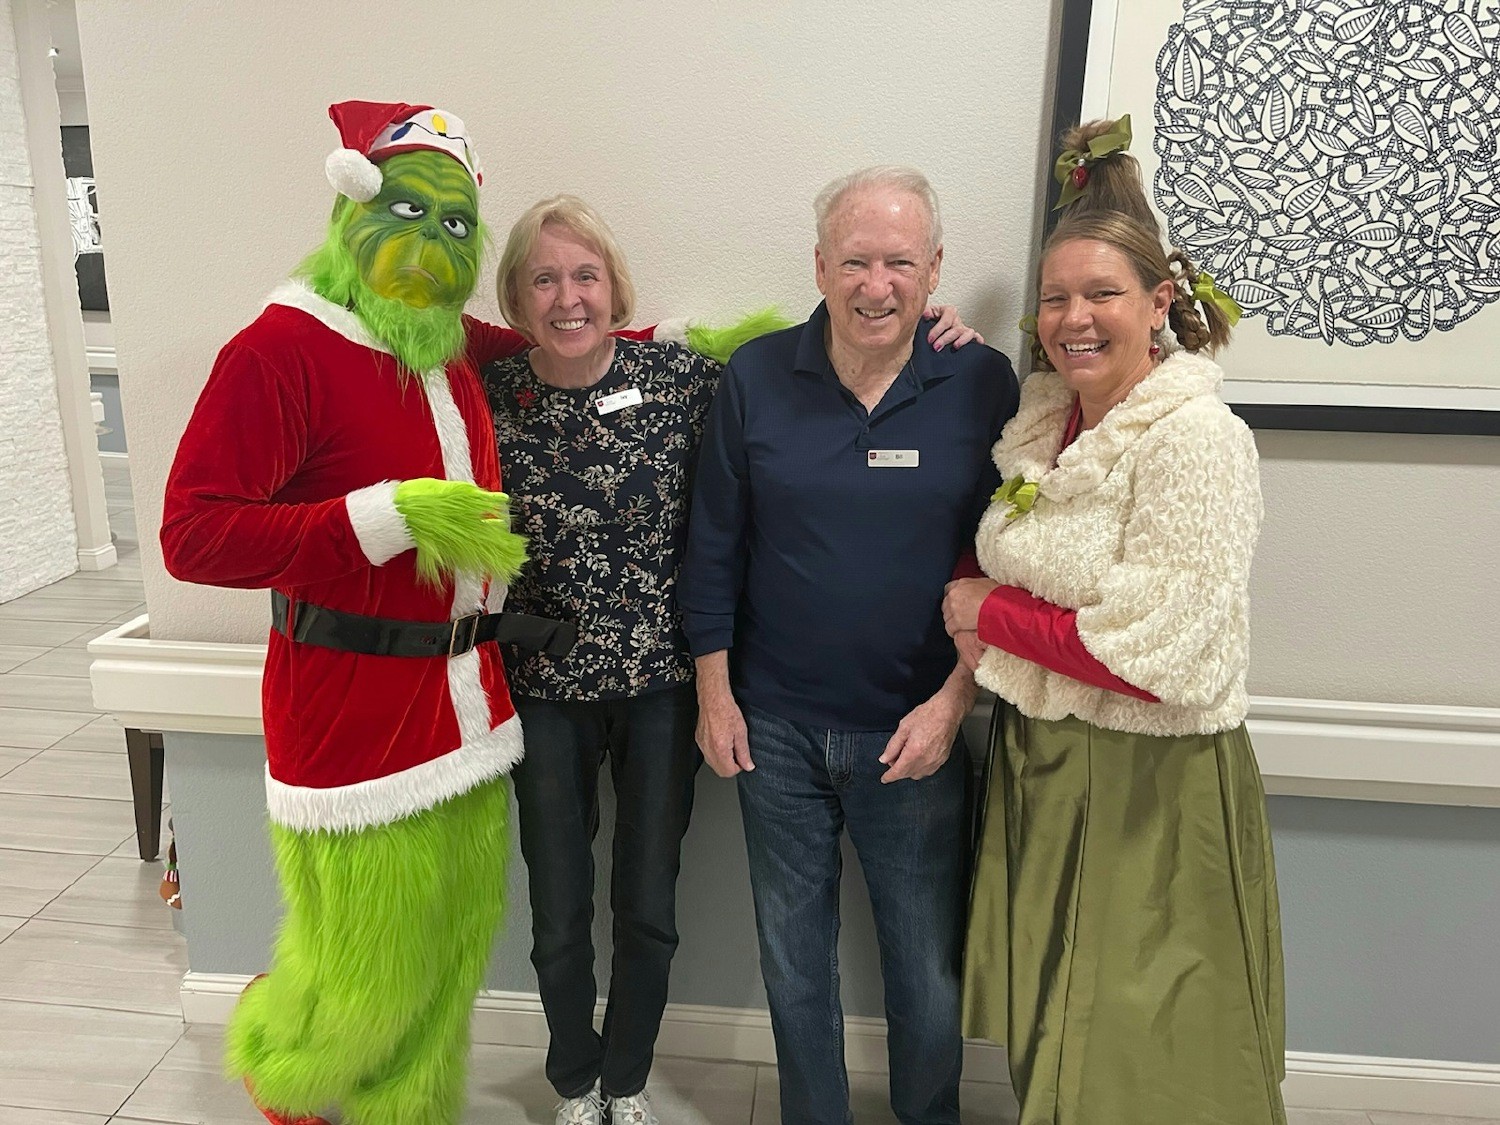 Cindy Lou and the Grinch paid a visit! Definitely not our Marketing Director and Accountant!